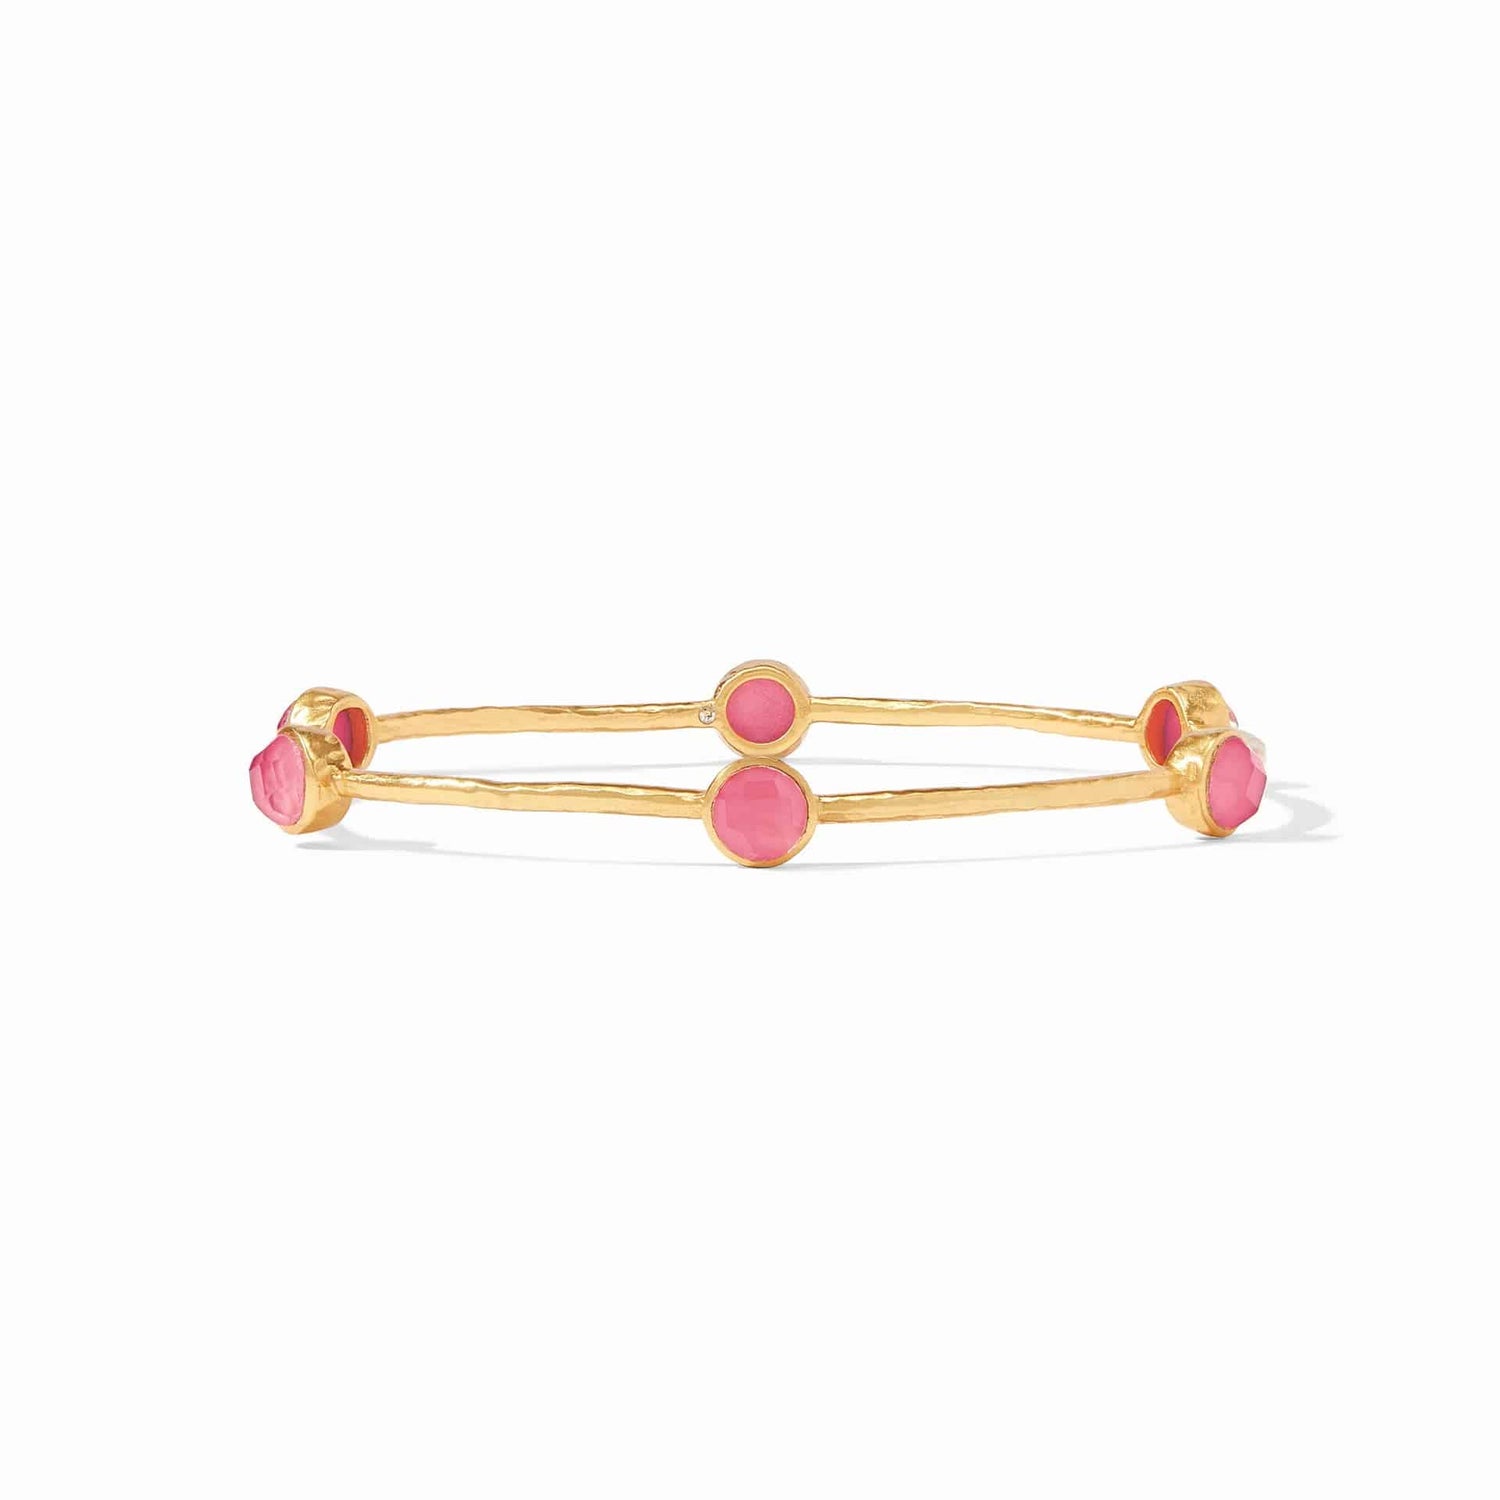 Julie Vos - Milano Luxe Bangle - Iridescent Peony Pink - Findlay Rowe Designs